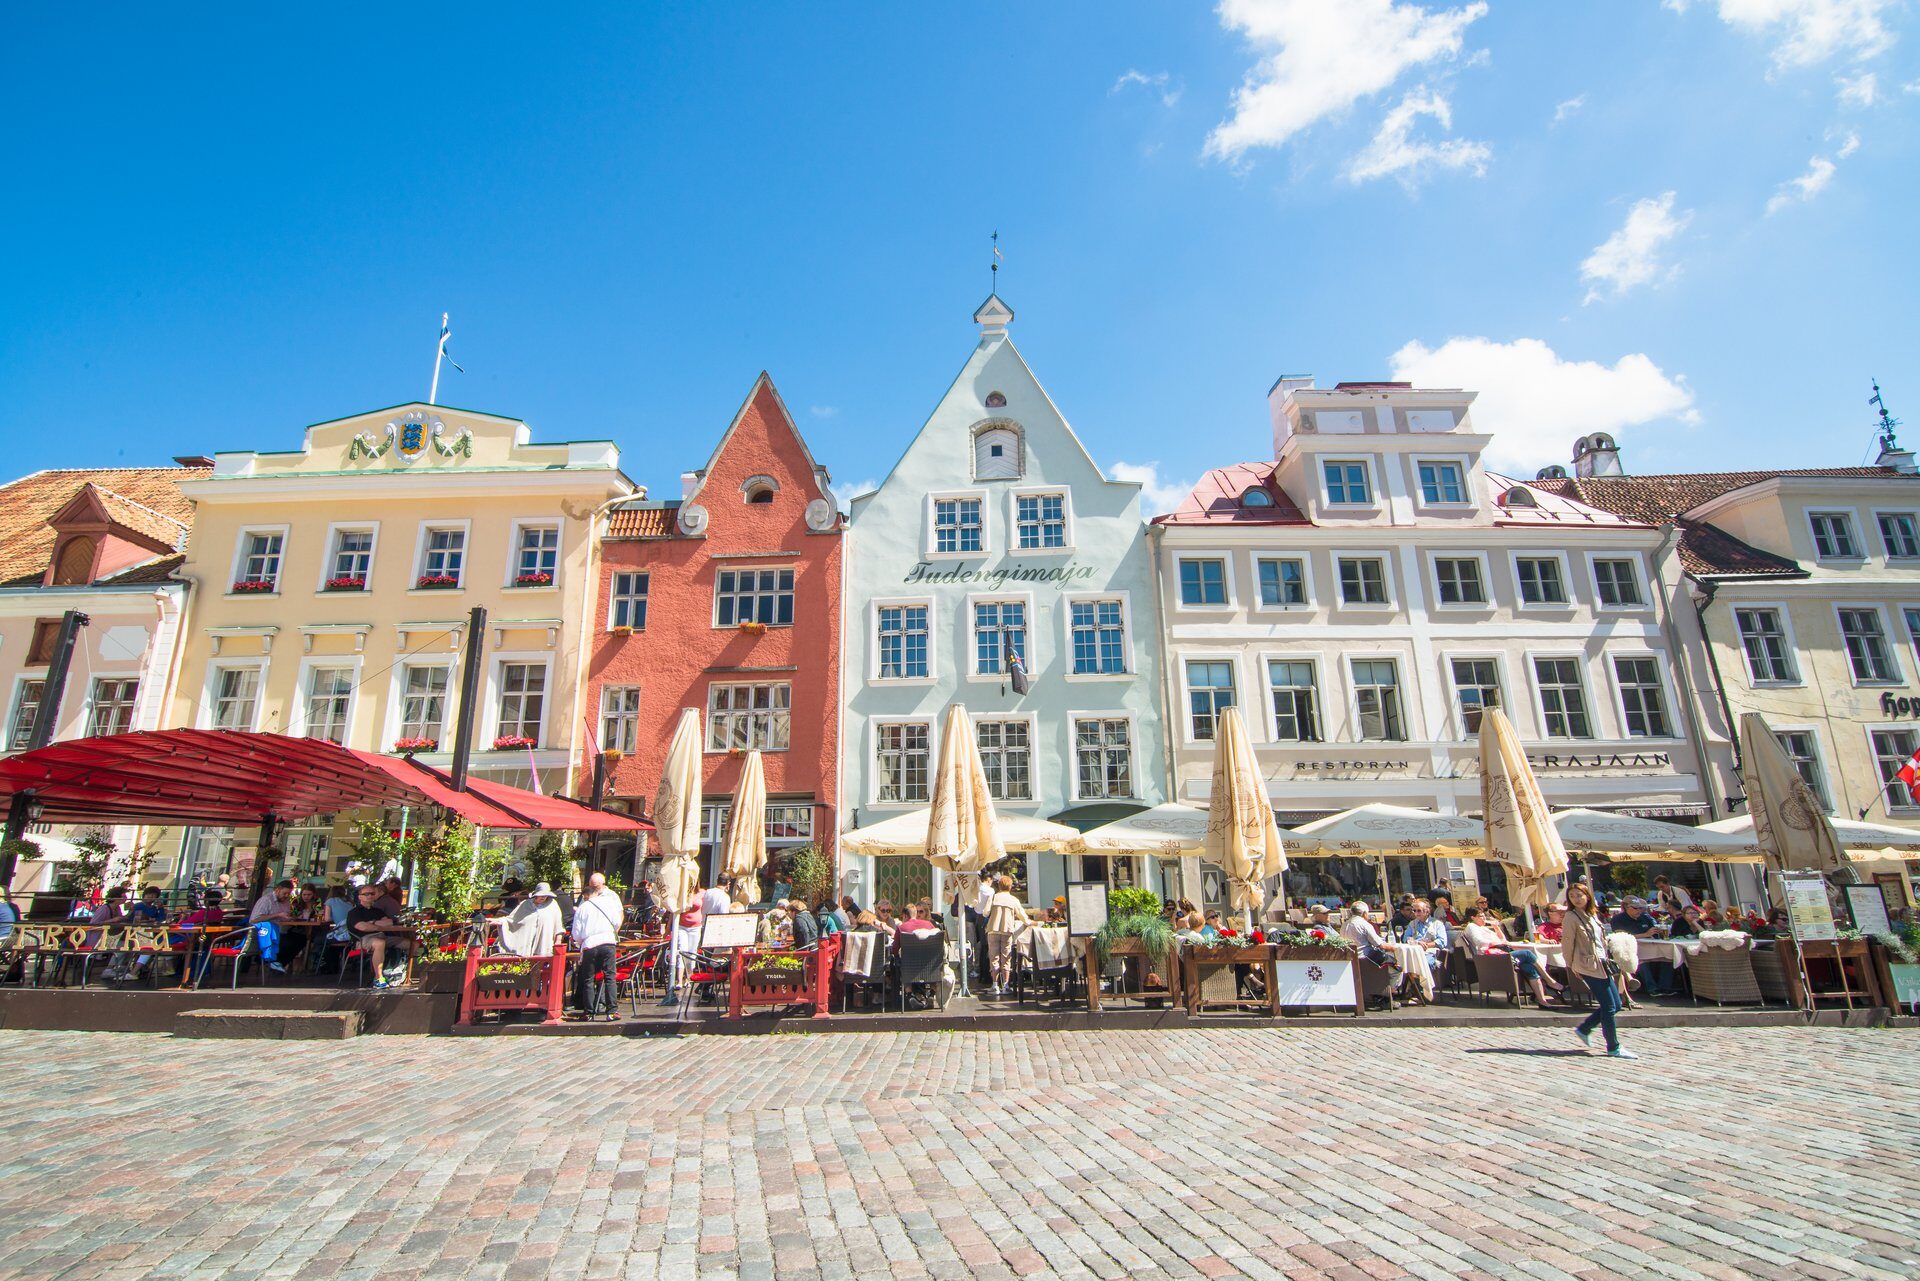 30 Unforgettable Things to Do in Tallinn